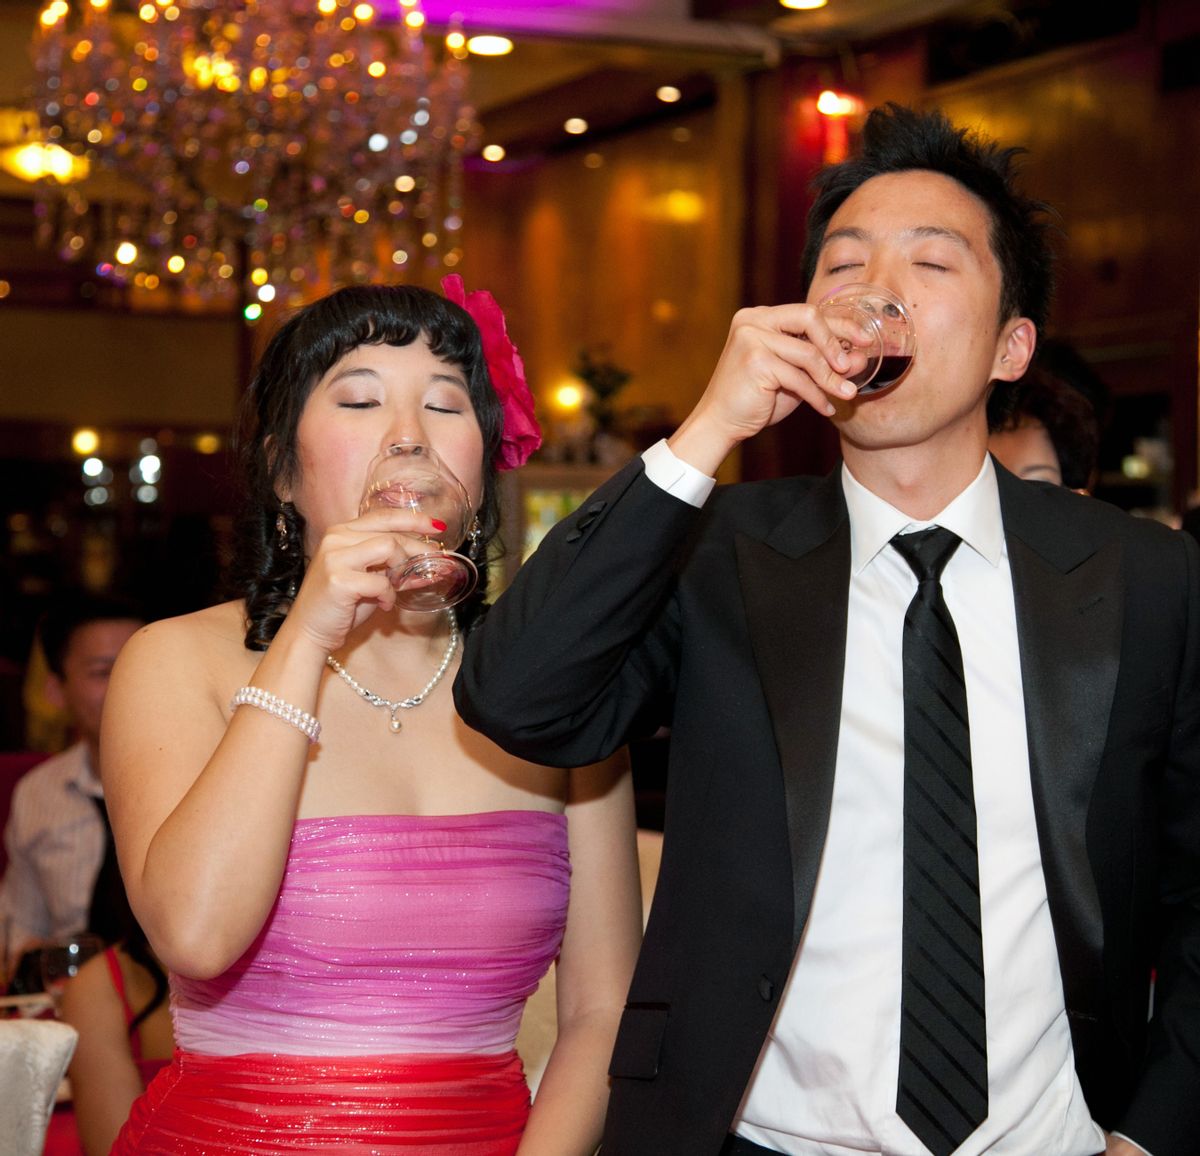 A photo of the author and her husband taking one of many cognac shots on her wedding night.  